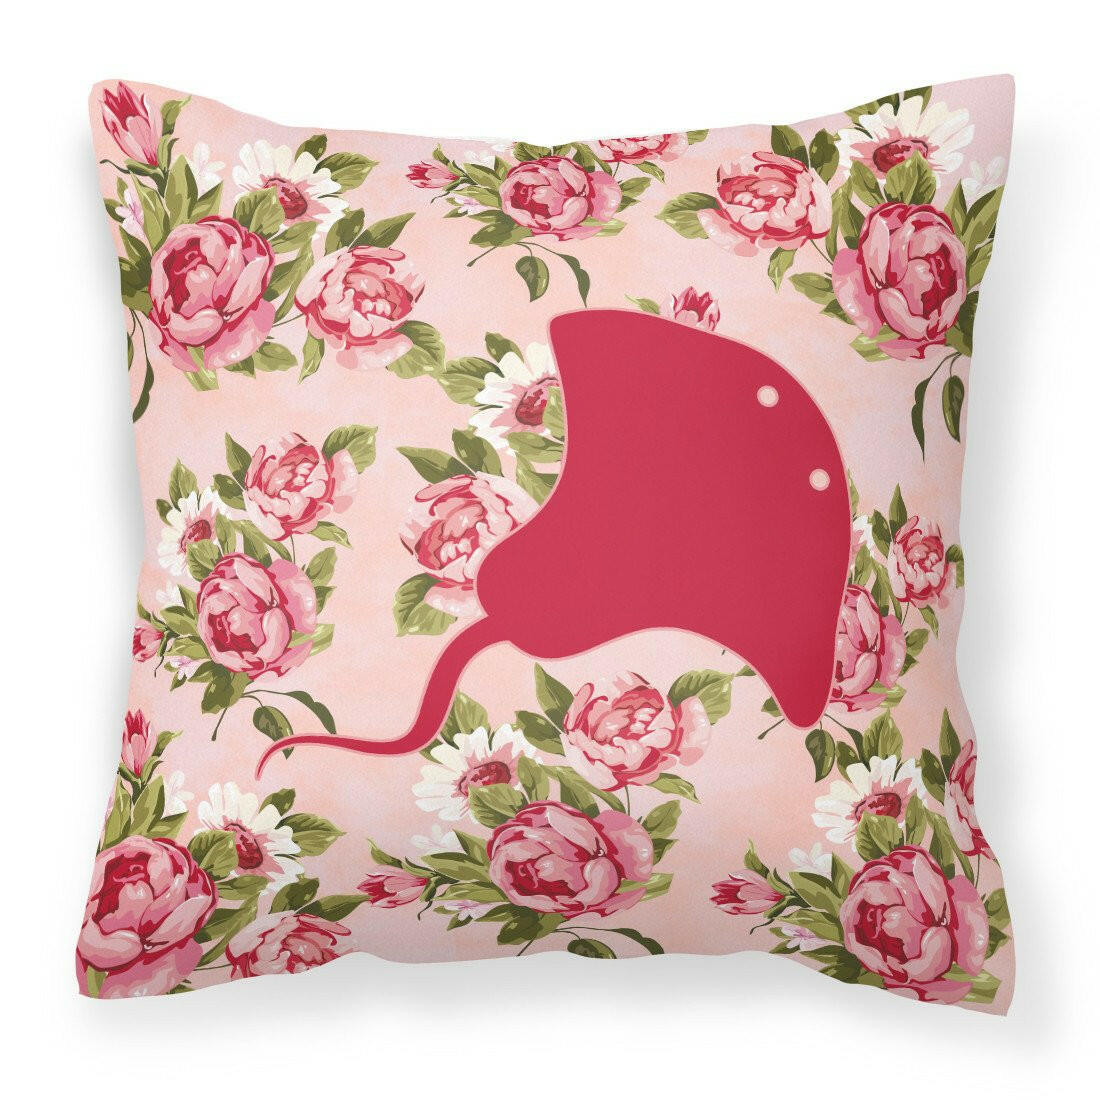 Stingray Shabby Chic Pink Roses  Fabric Decorative Pillow BB1095-RS-PK-PW1414 - the-store.com